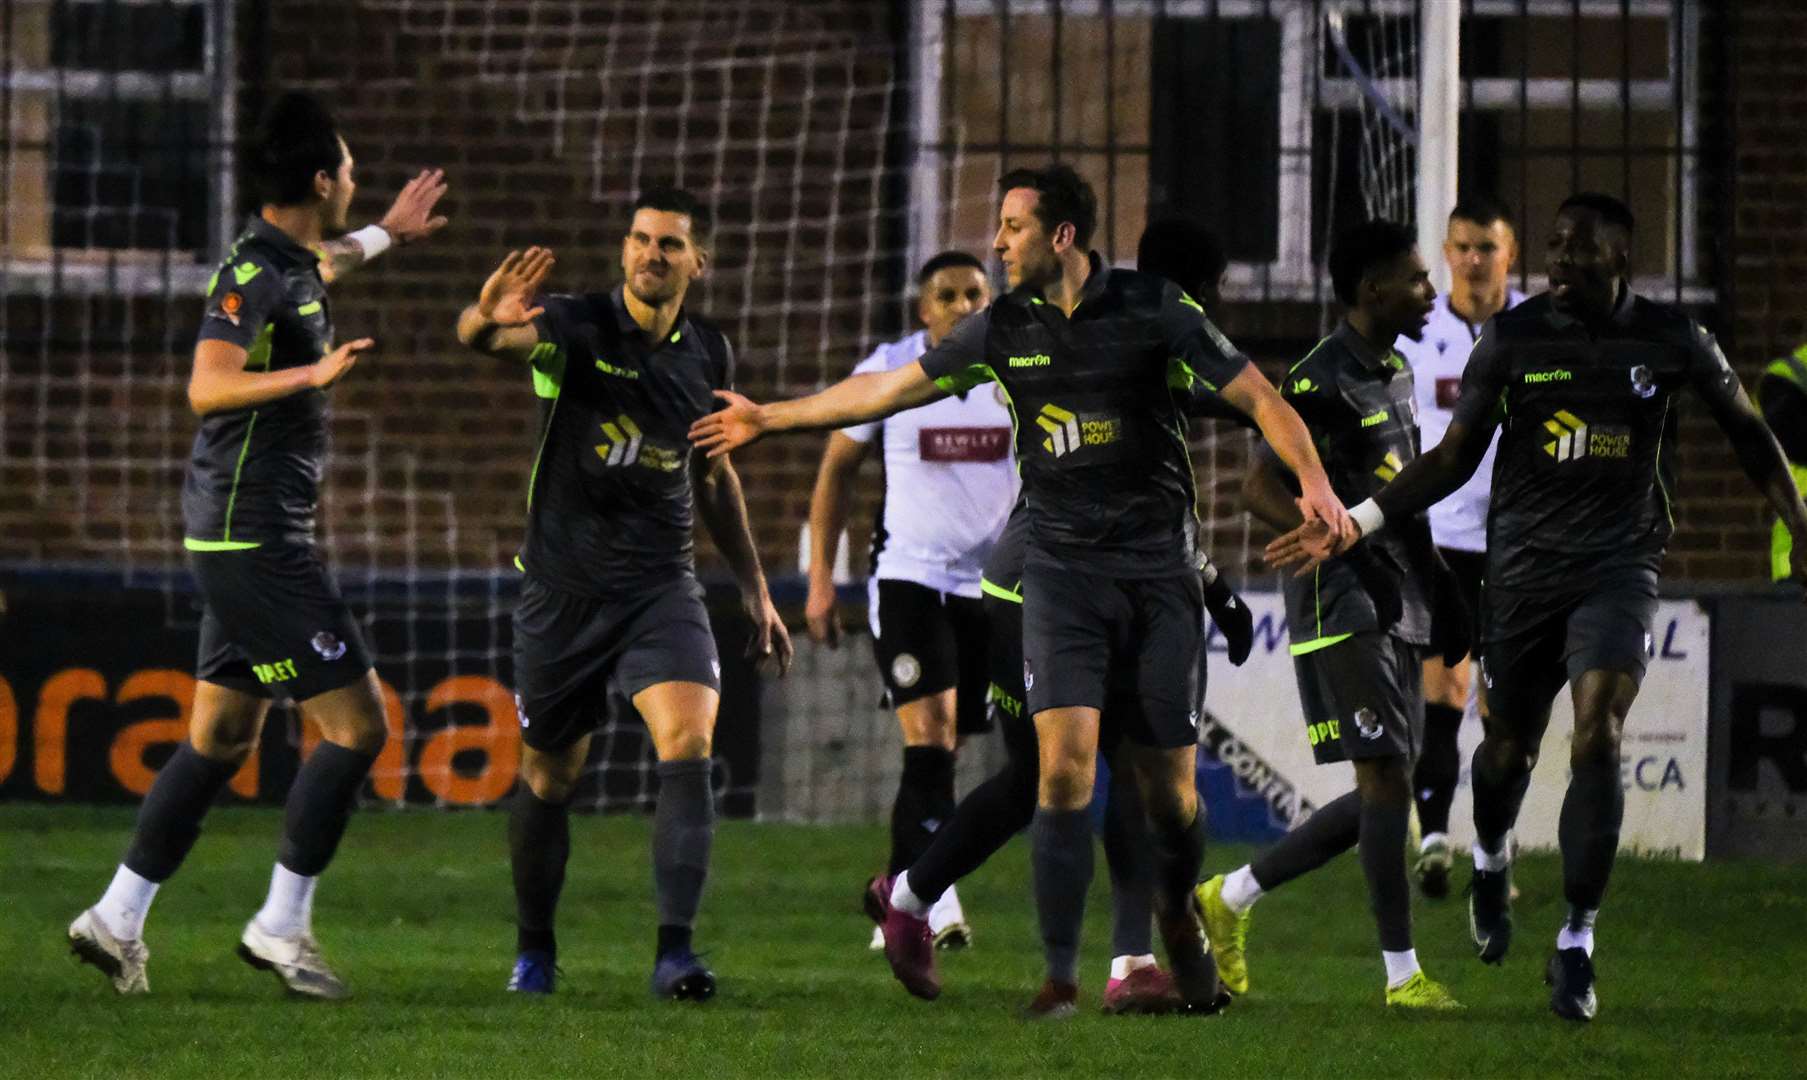 Dartford celebrate their first goal at Hungerford last weekend. Picture: Phillip Cannings (43397212)